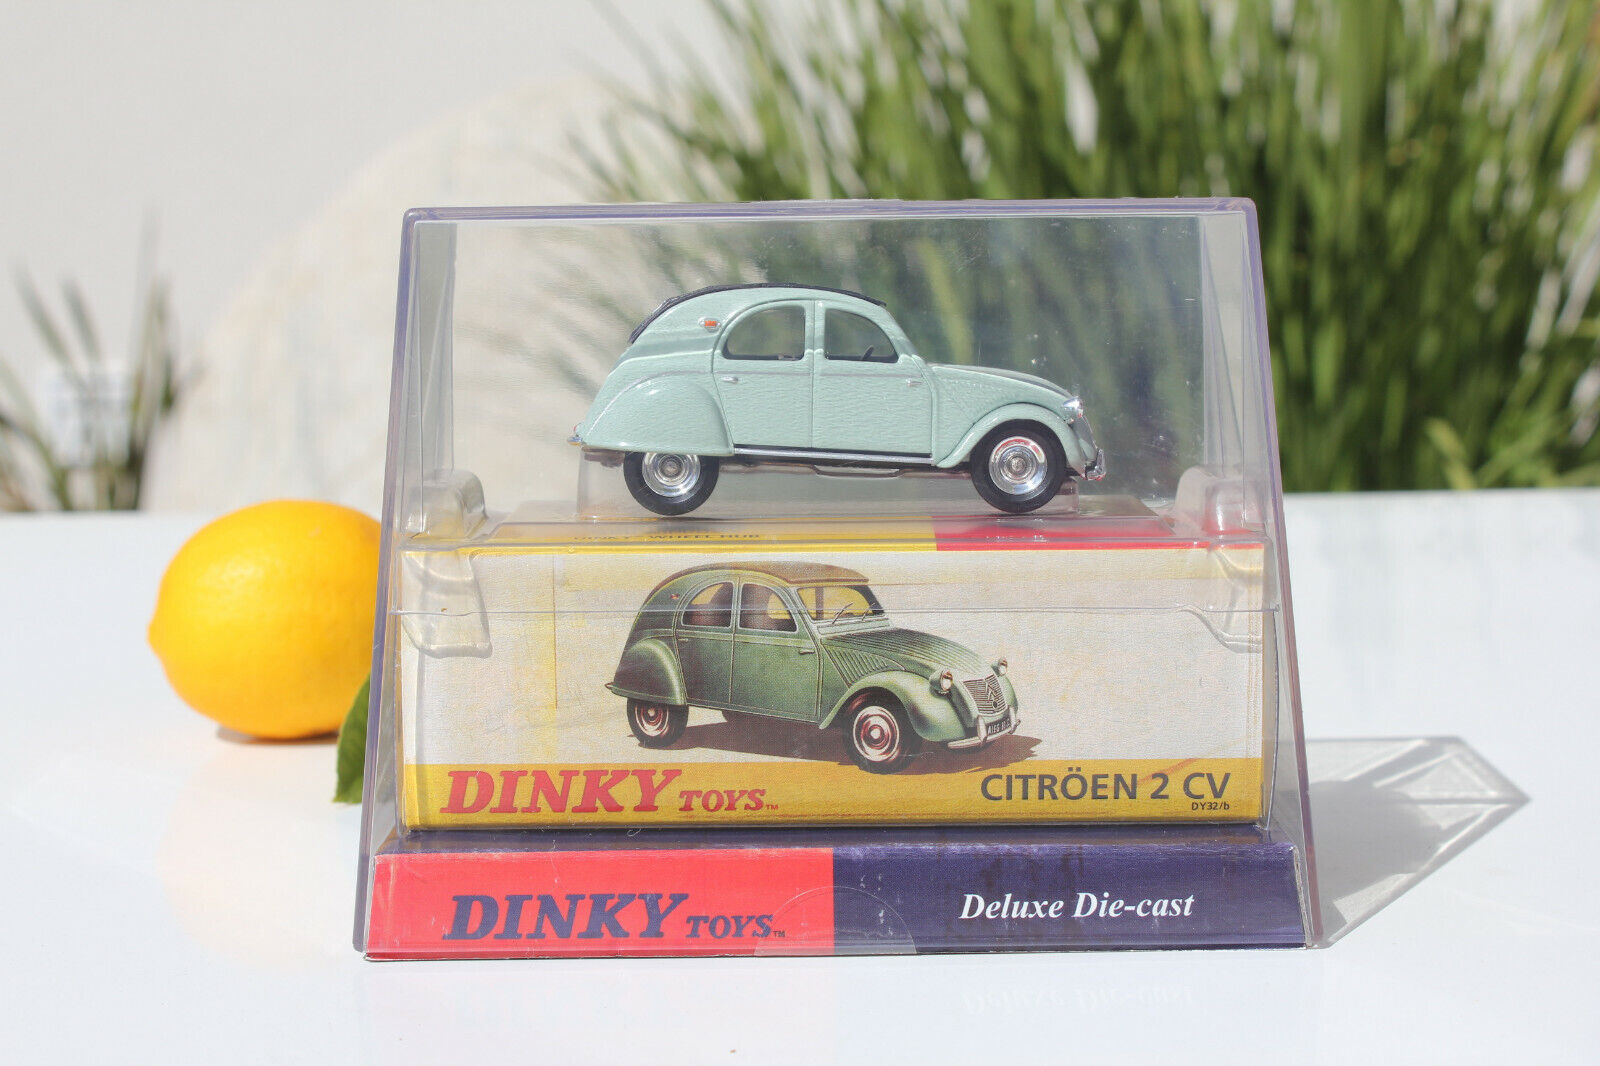 Rare CITROEN 2 CV Miniature Car Deluxe DieCast French Classic by Dinky Toys MIB.